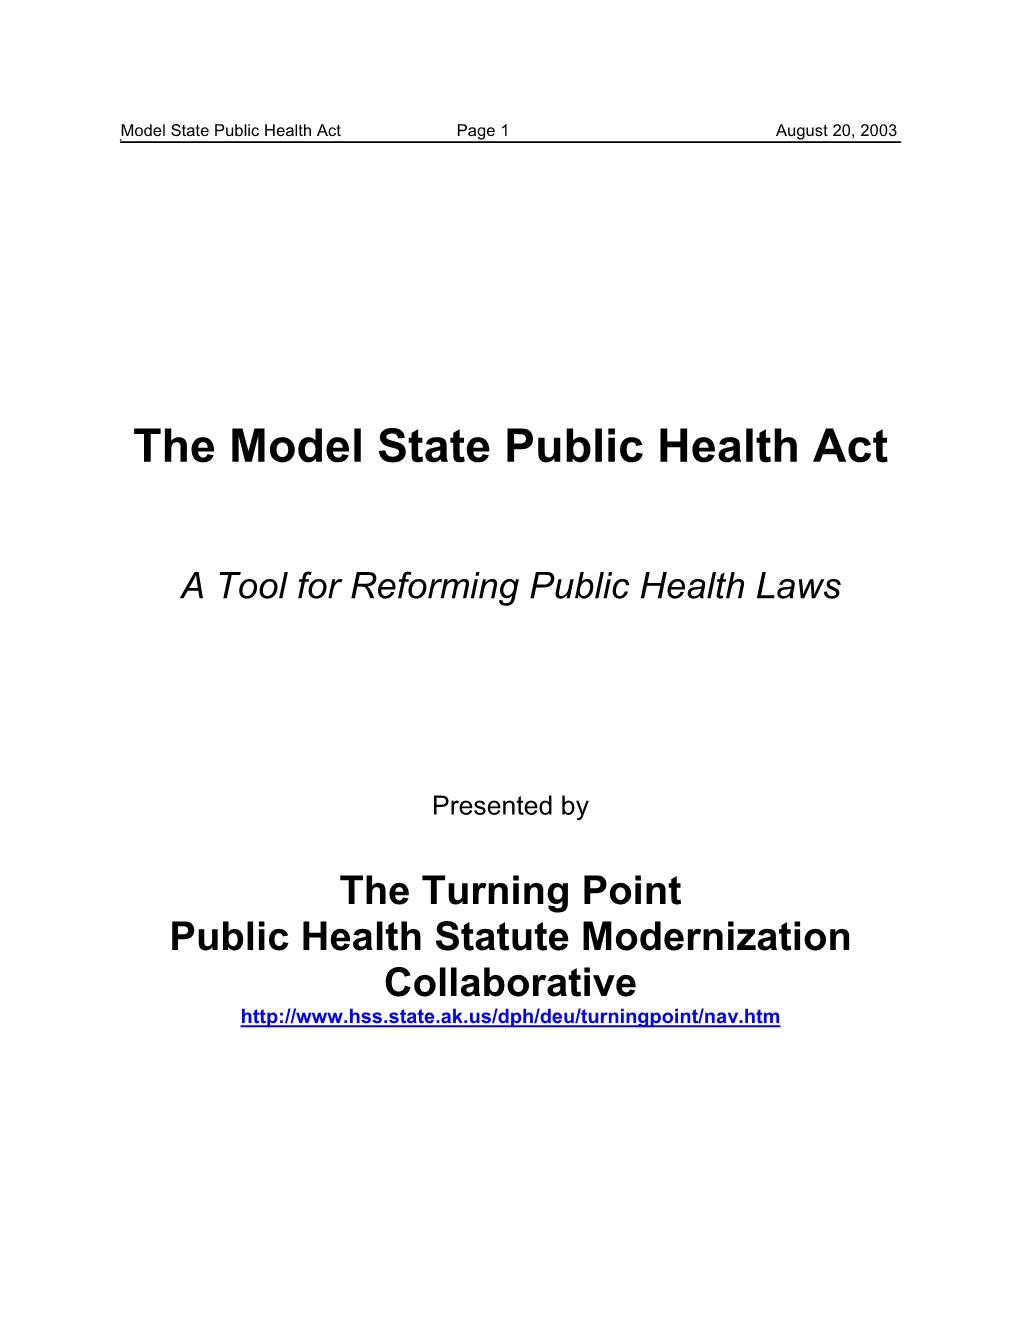 Turning Point Model State Public Health Act As a Primary Resource